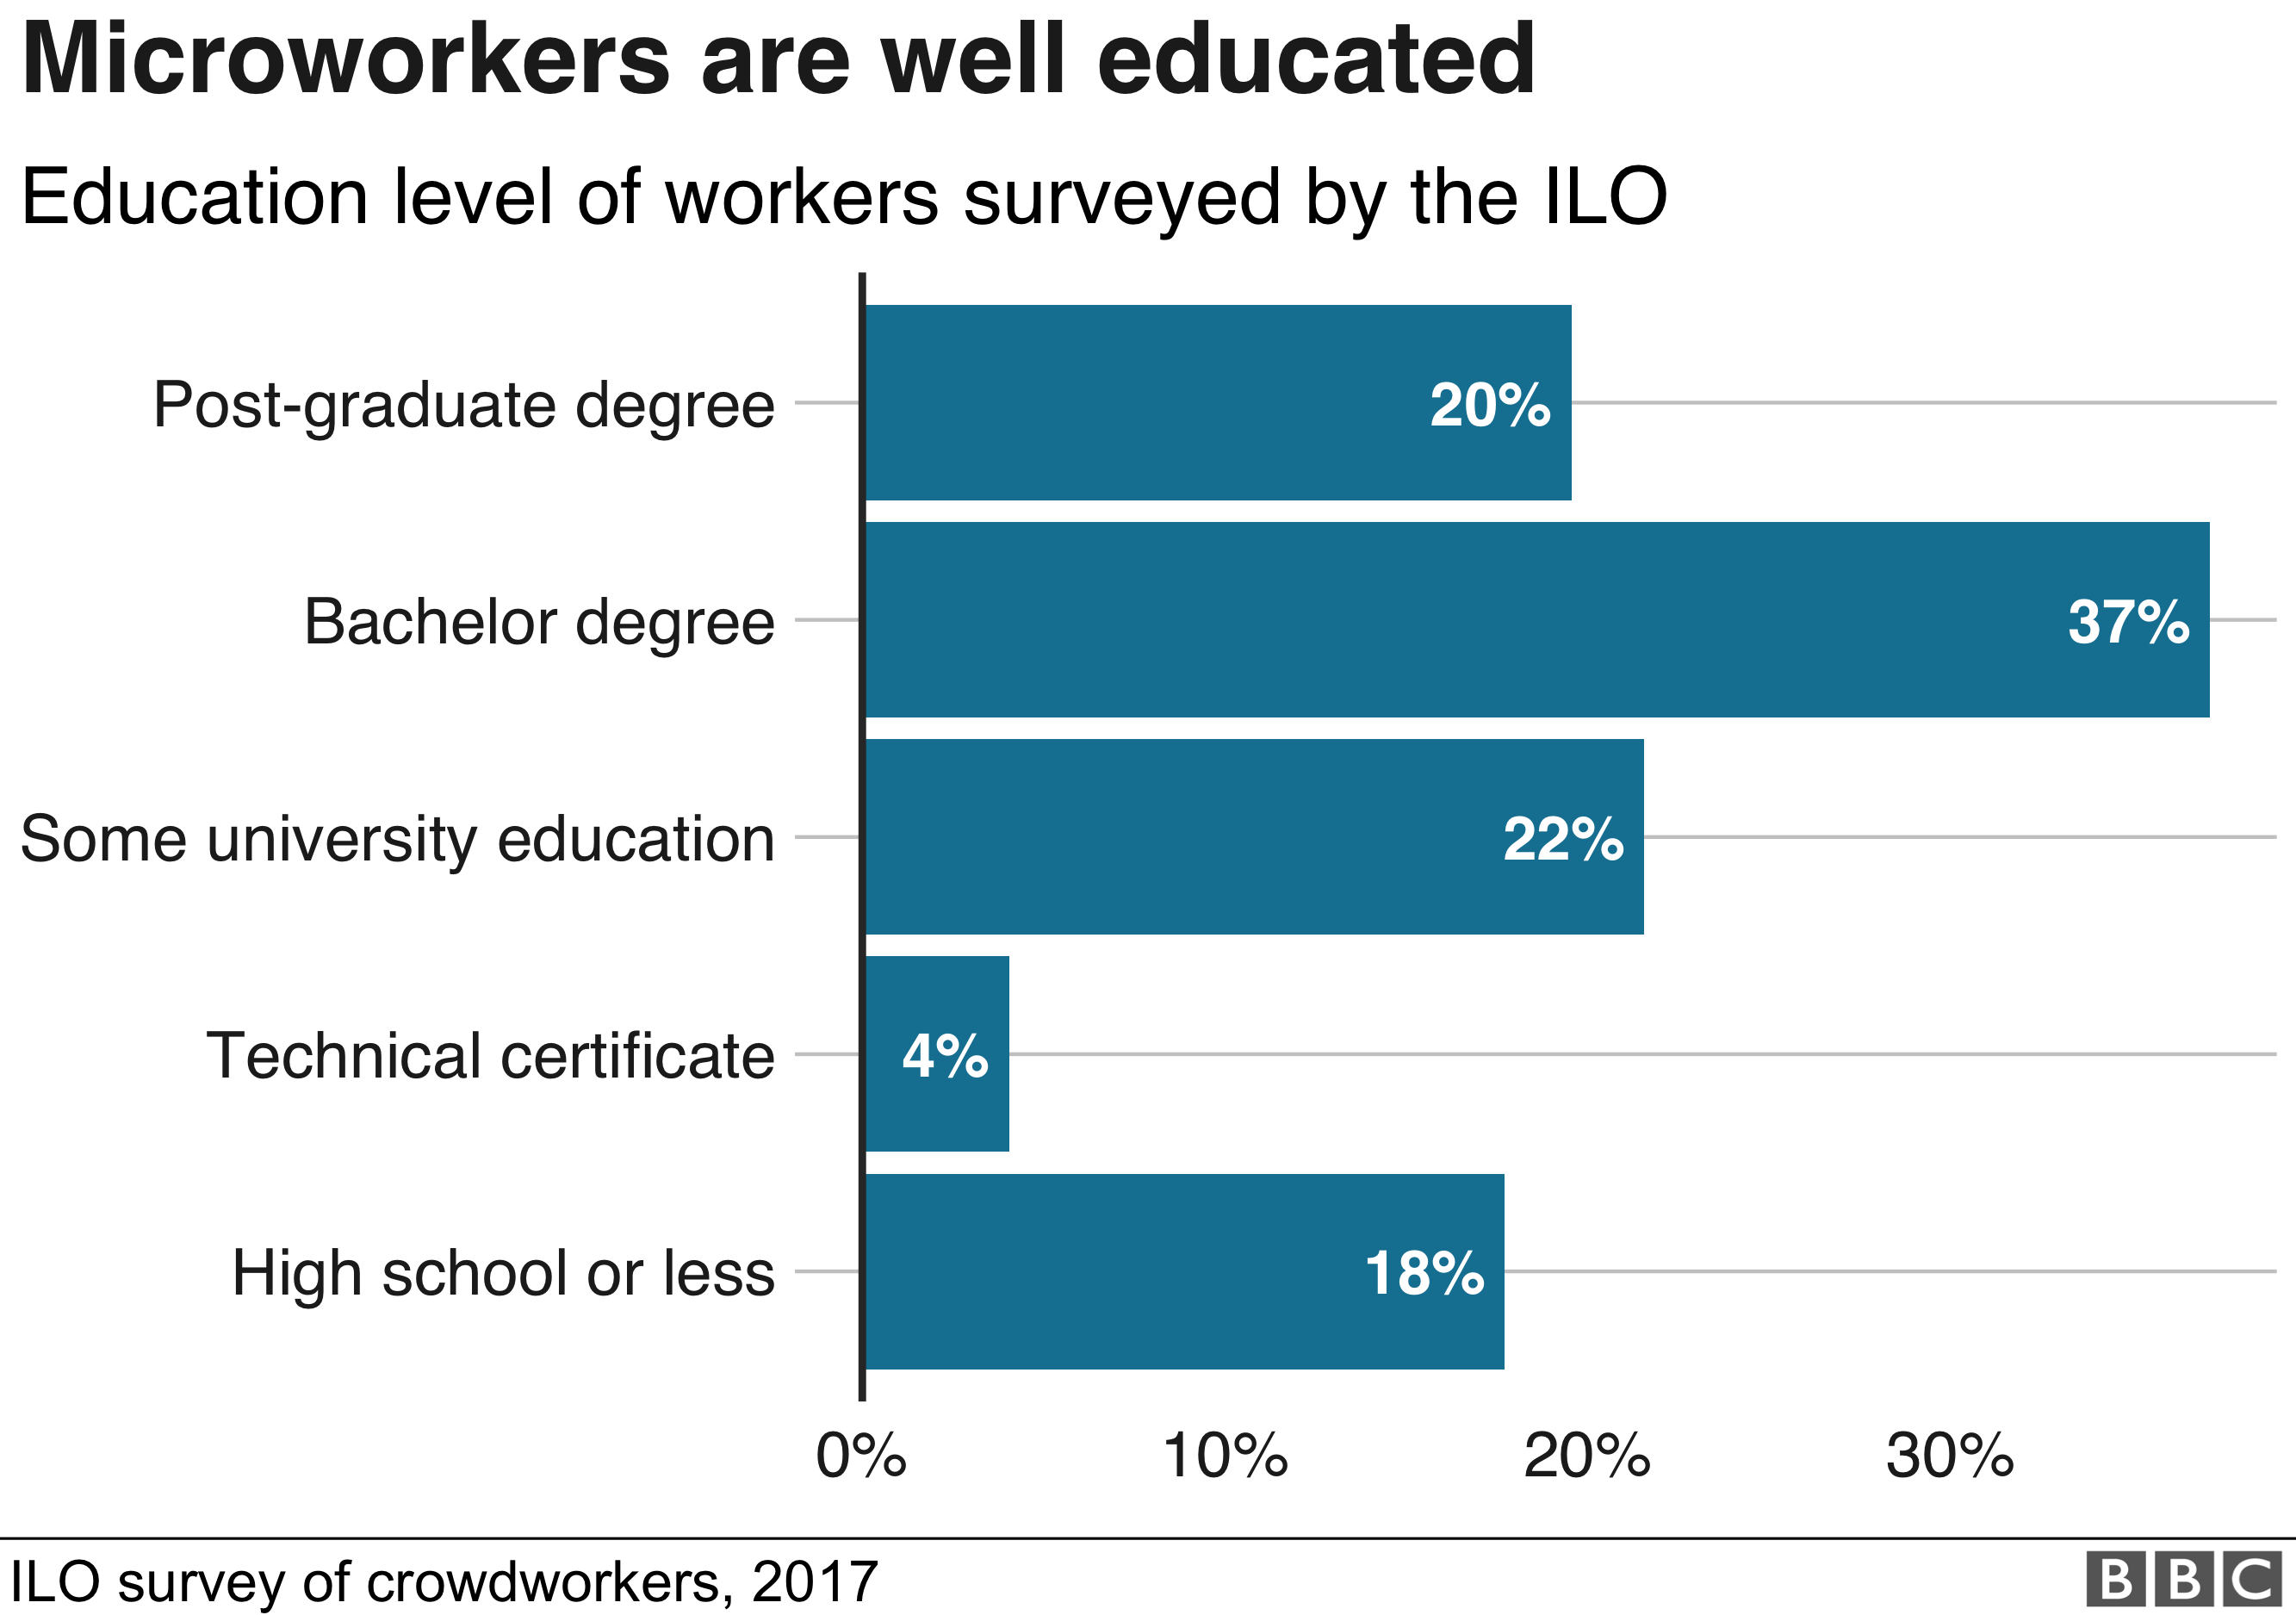 Chart showing the level of education of microworkers